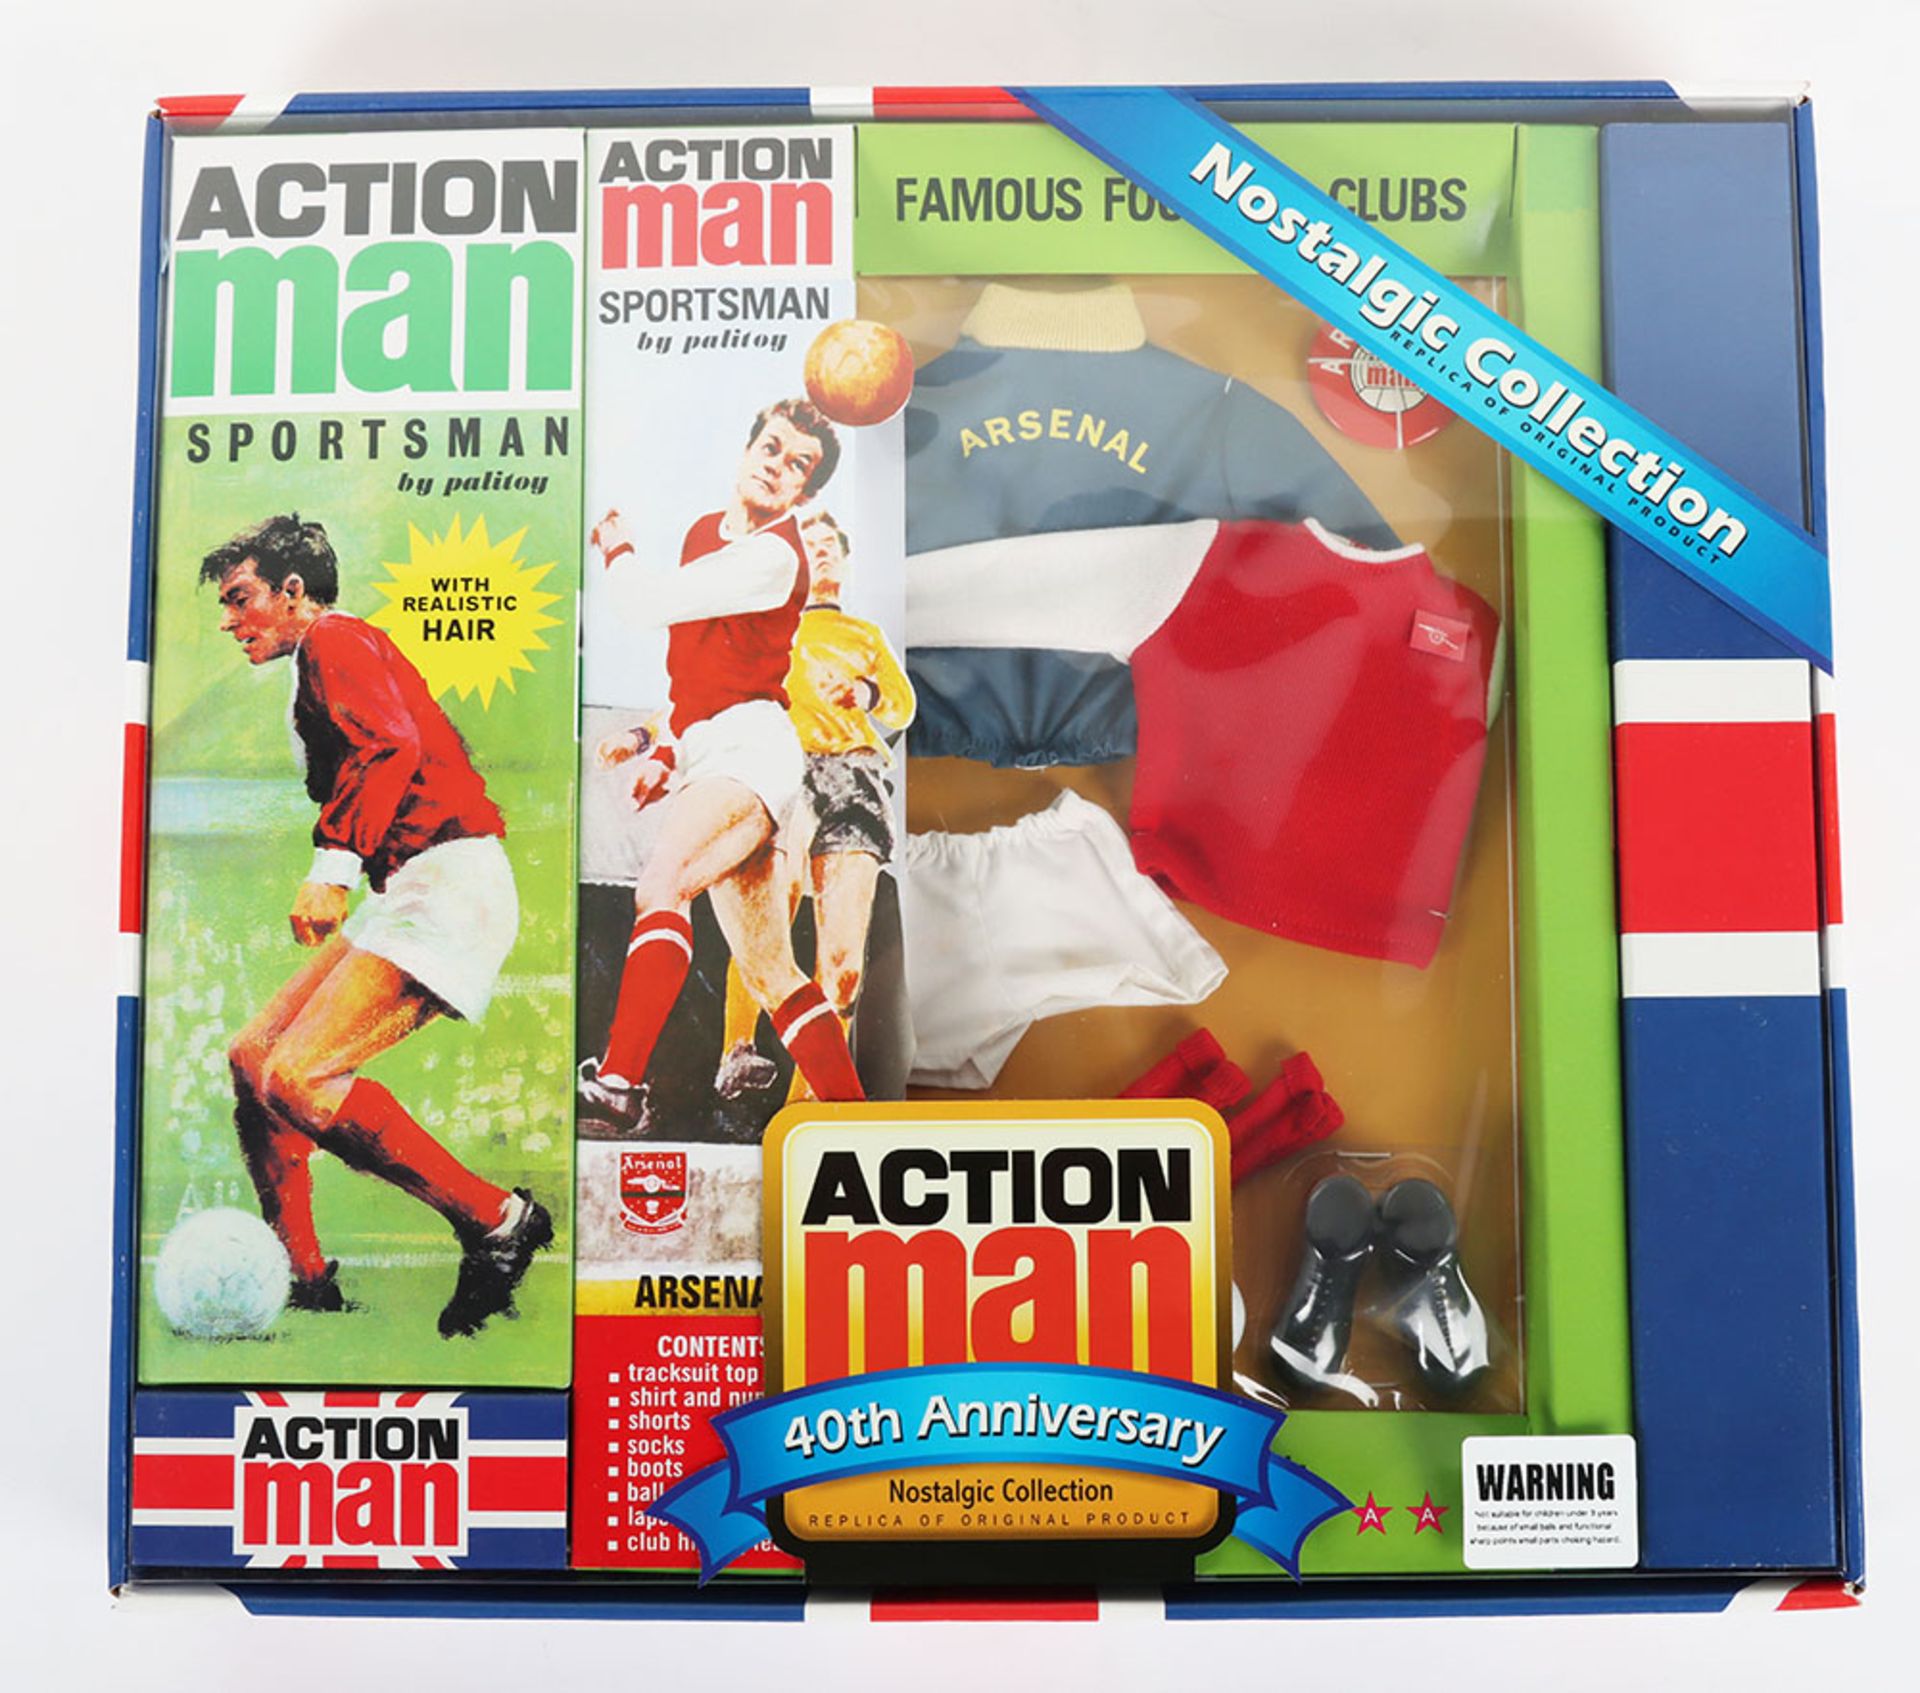 Action Man Palitoy Sportsman Famous Football Clubs Arsenal 40th Anniversary Nostalgic Collection